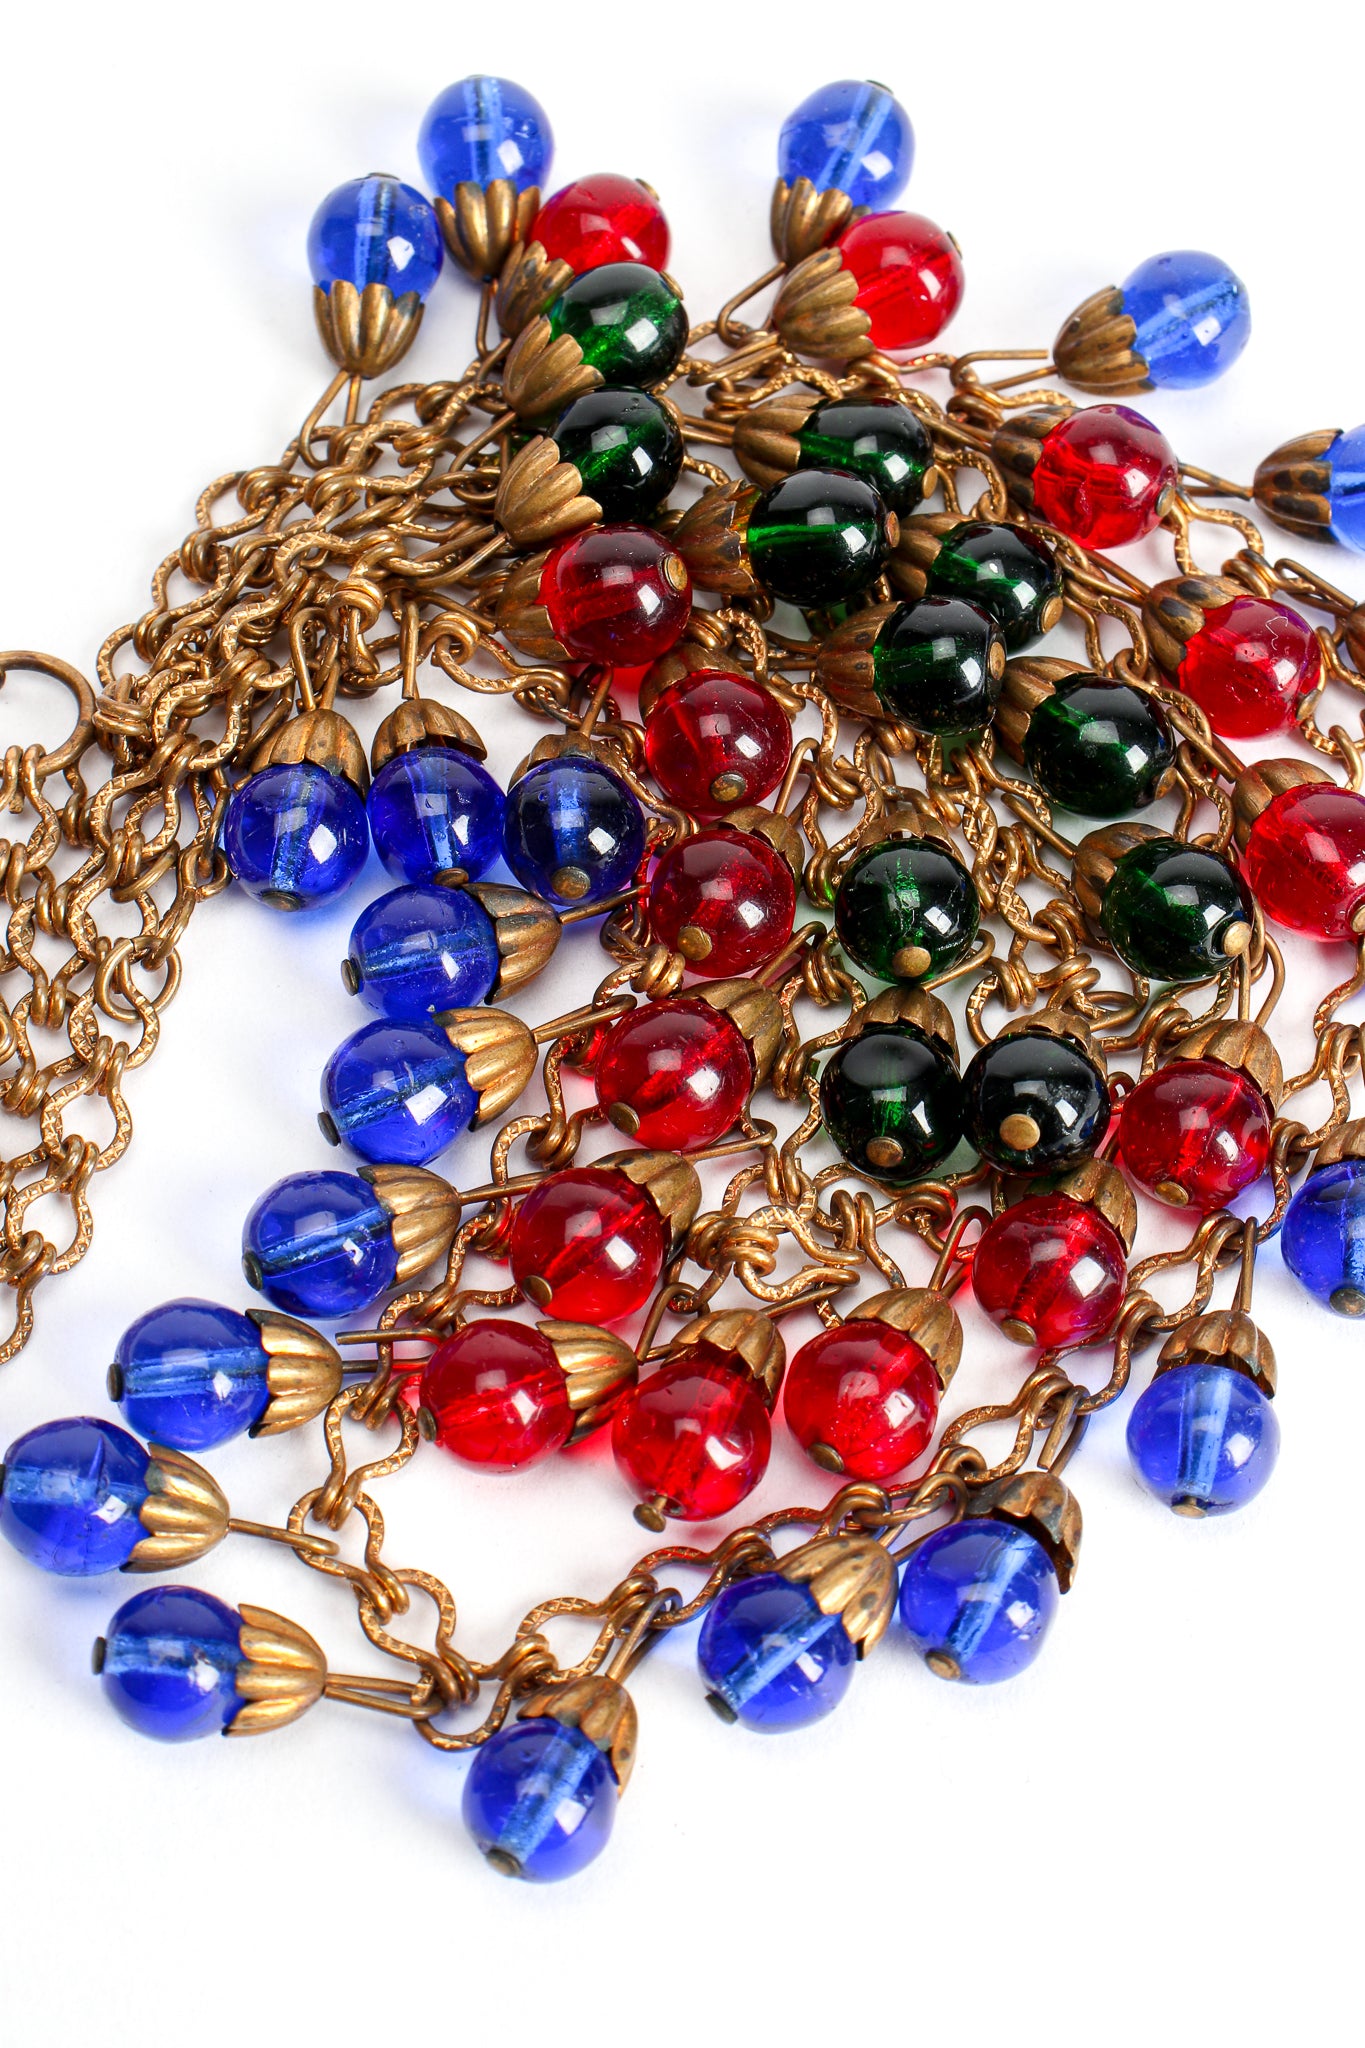 Vintage Tiered Glass Bead Bib Necklace at Recess Los Angeles